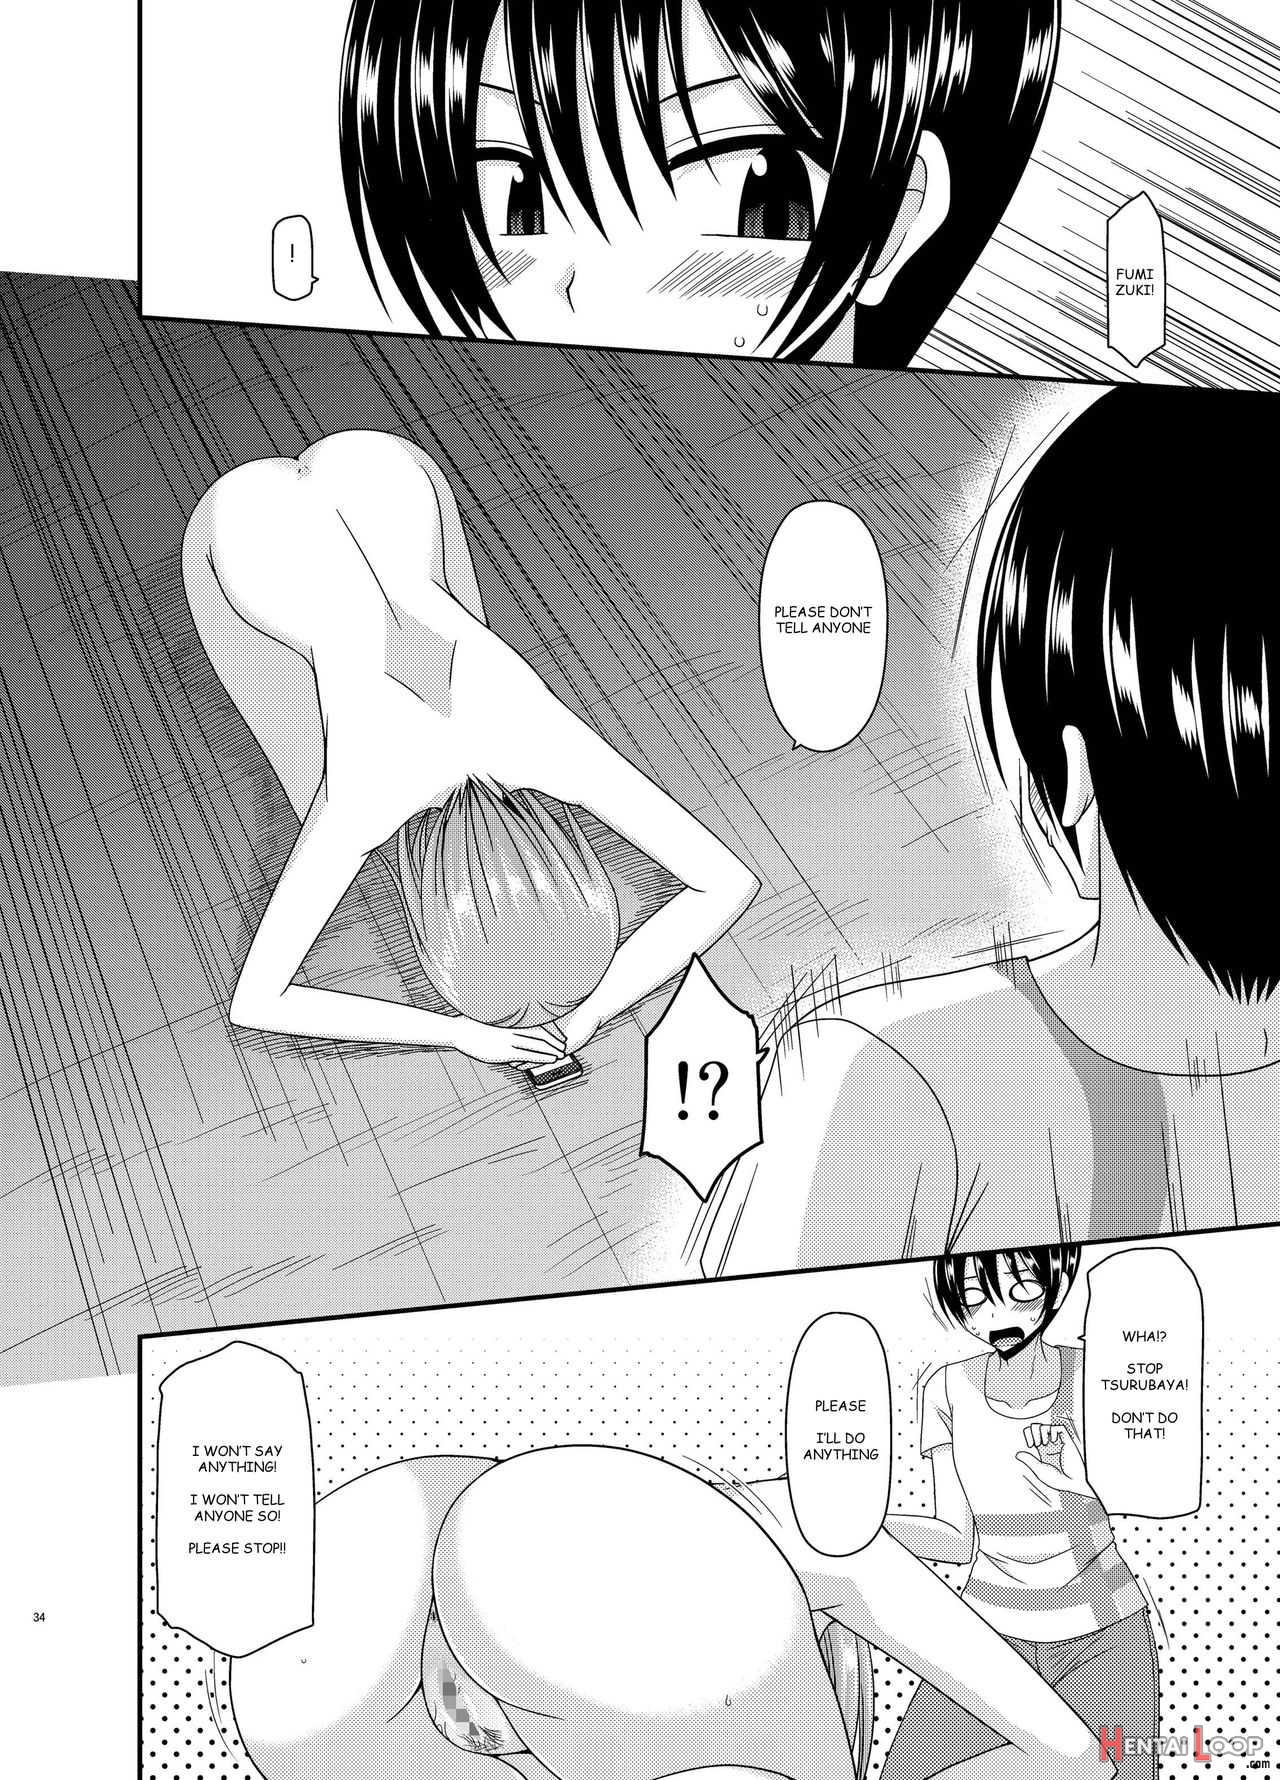 Exhibitionist Girl Diary Chapter 11 page 34